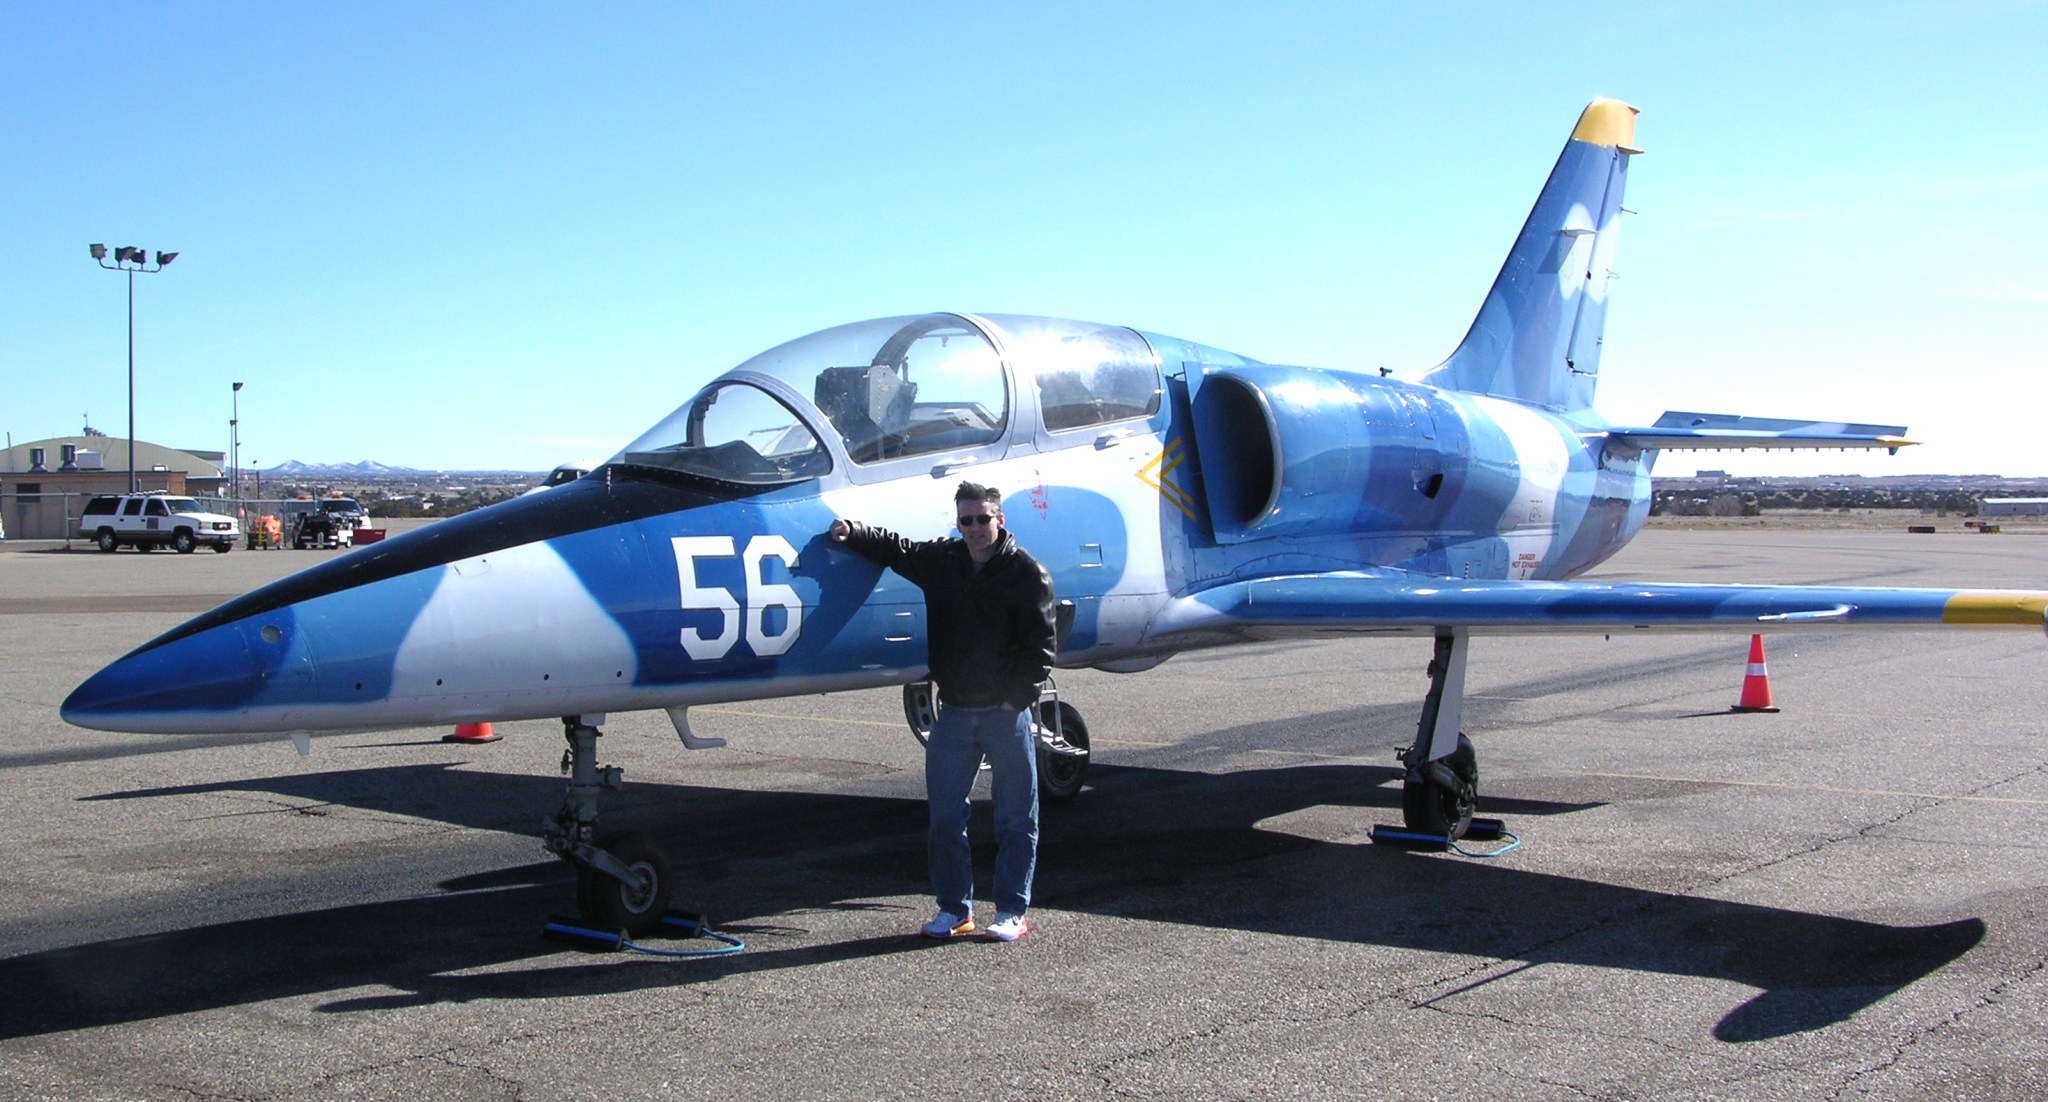 Bos next to the L-39